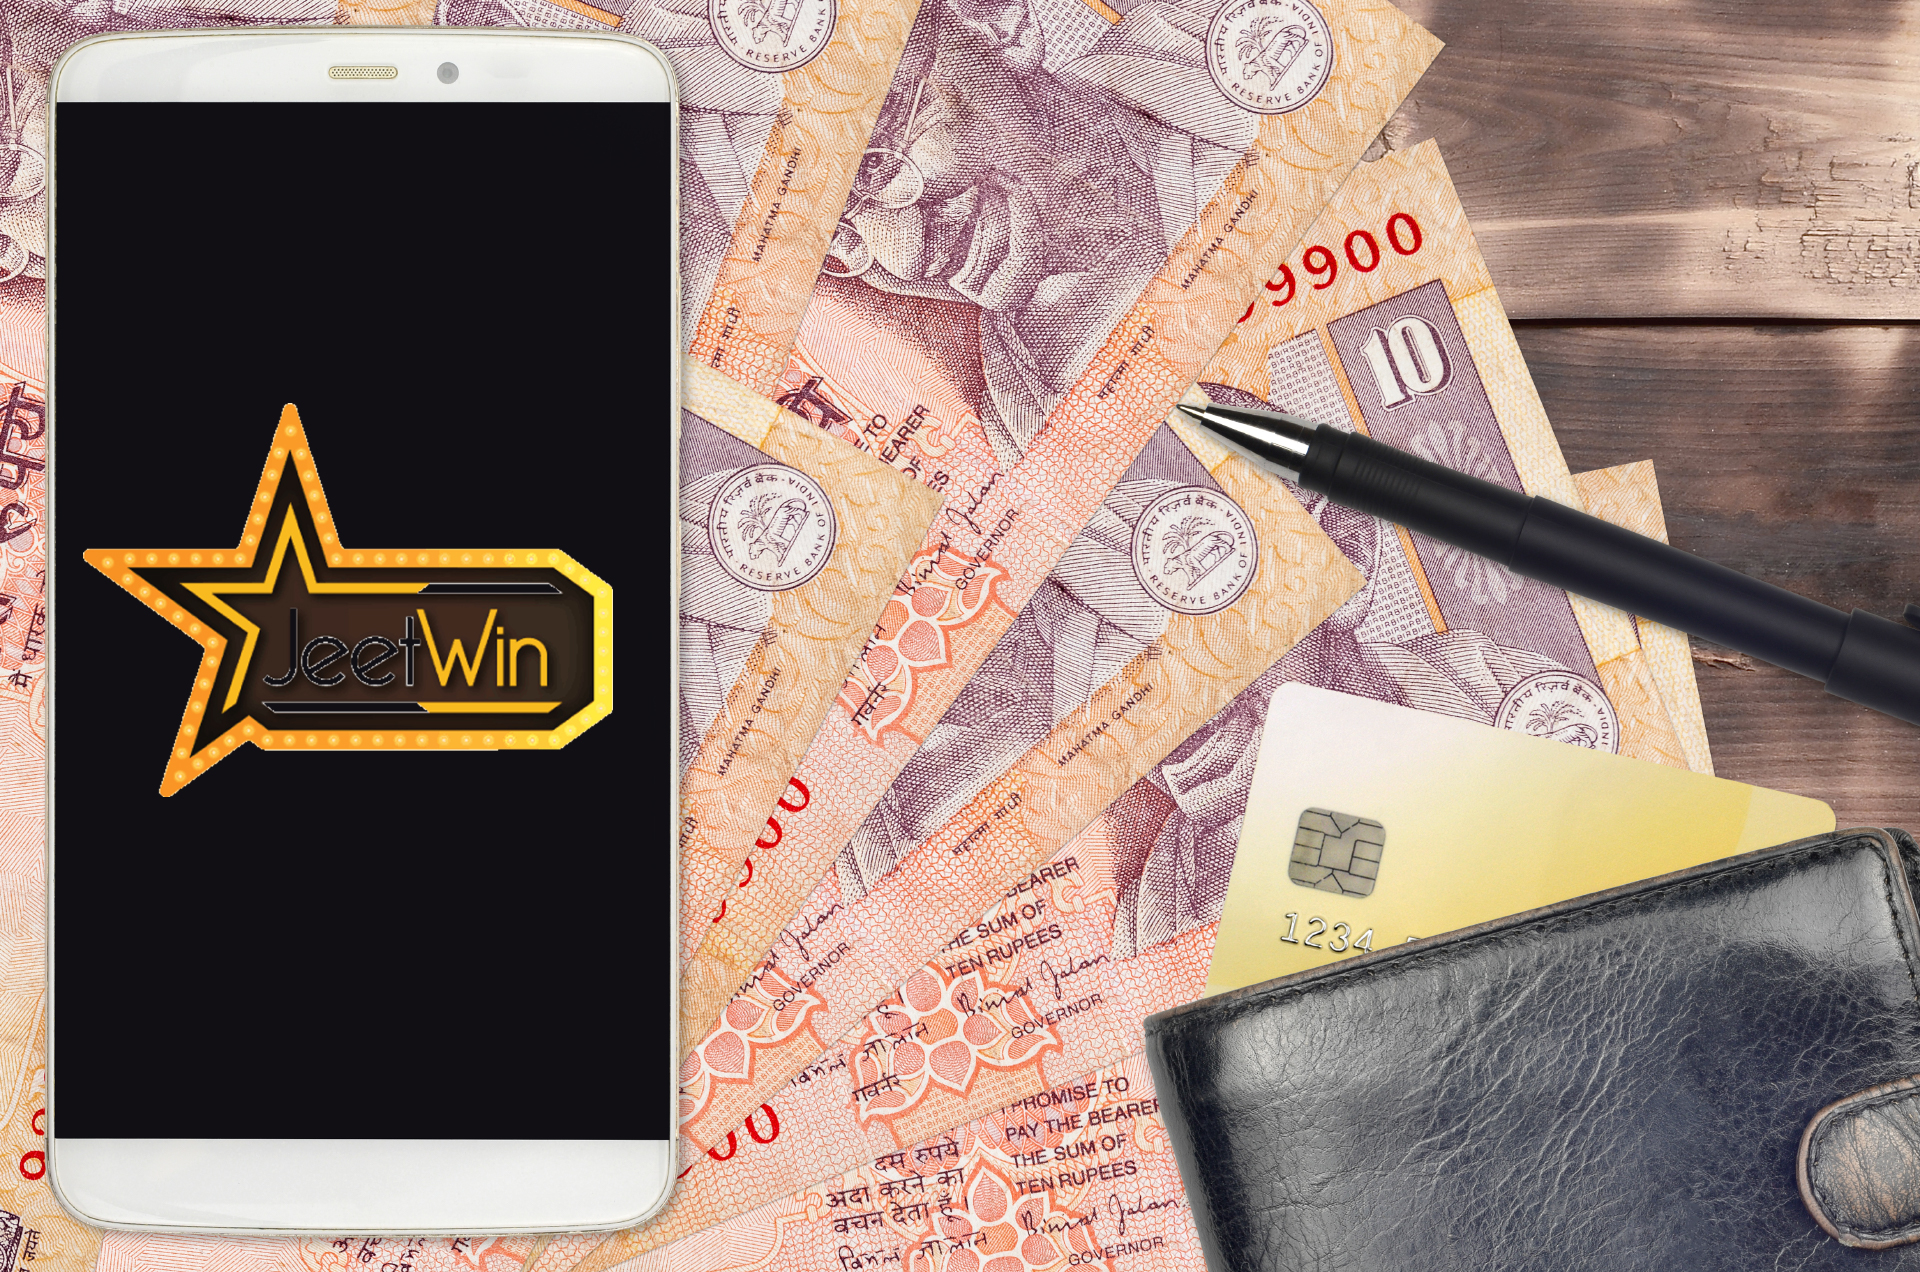 Withdraw money using real documents and payment accounts.